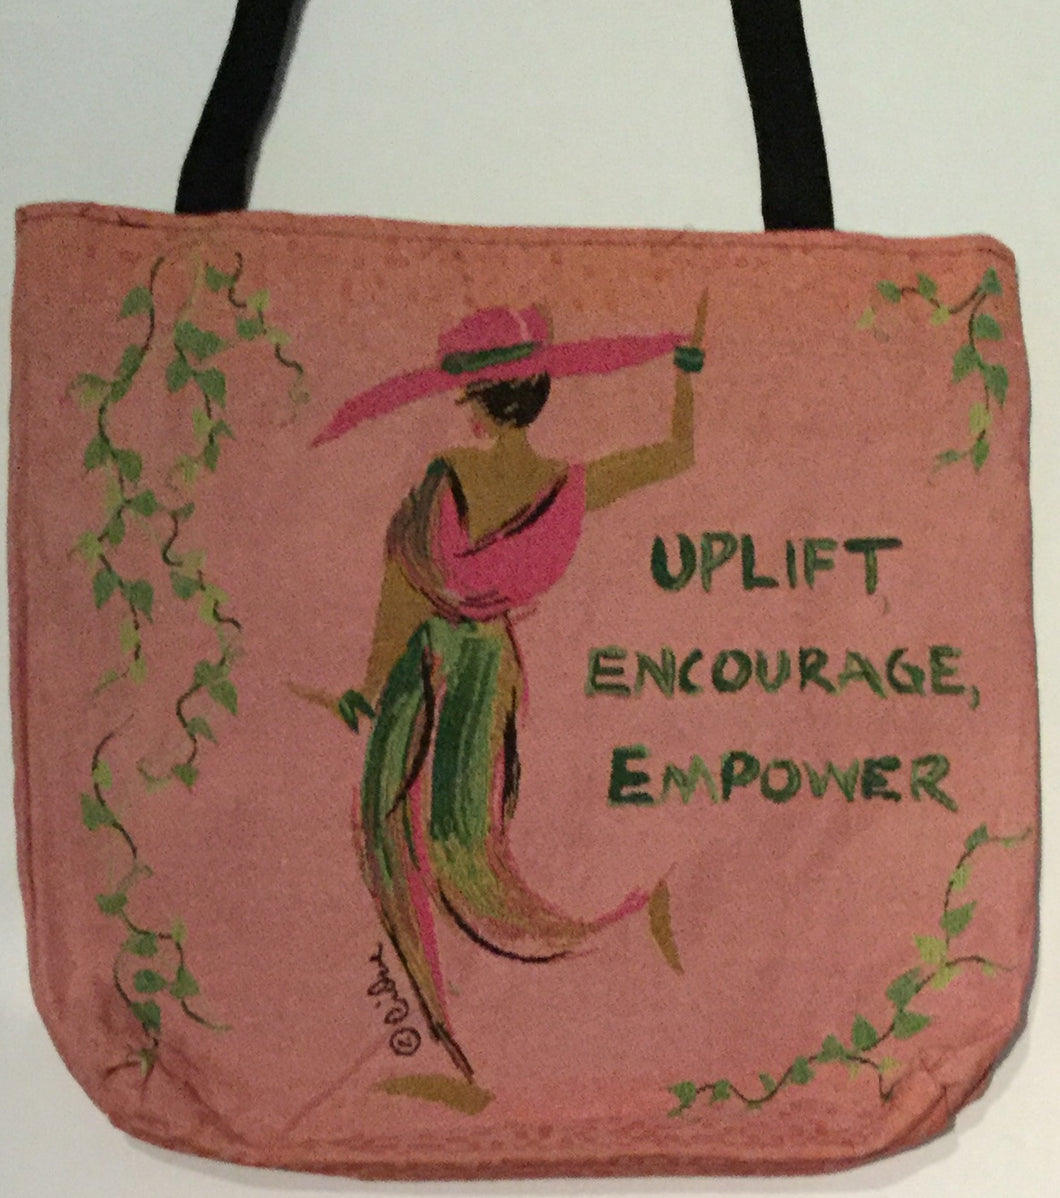 Uplift, Encourage, Empower Woven Tote Bag